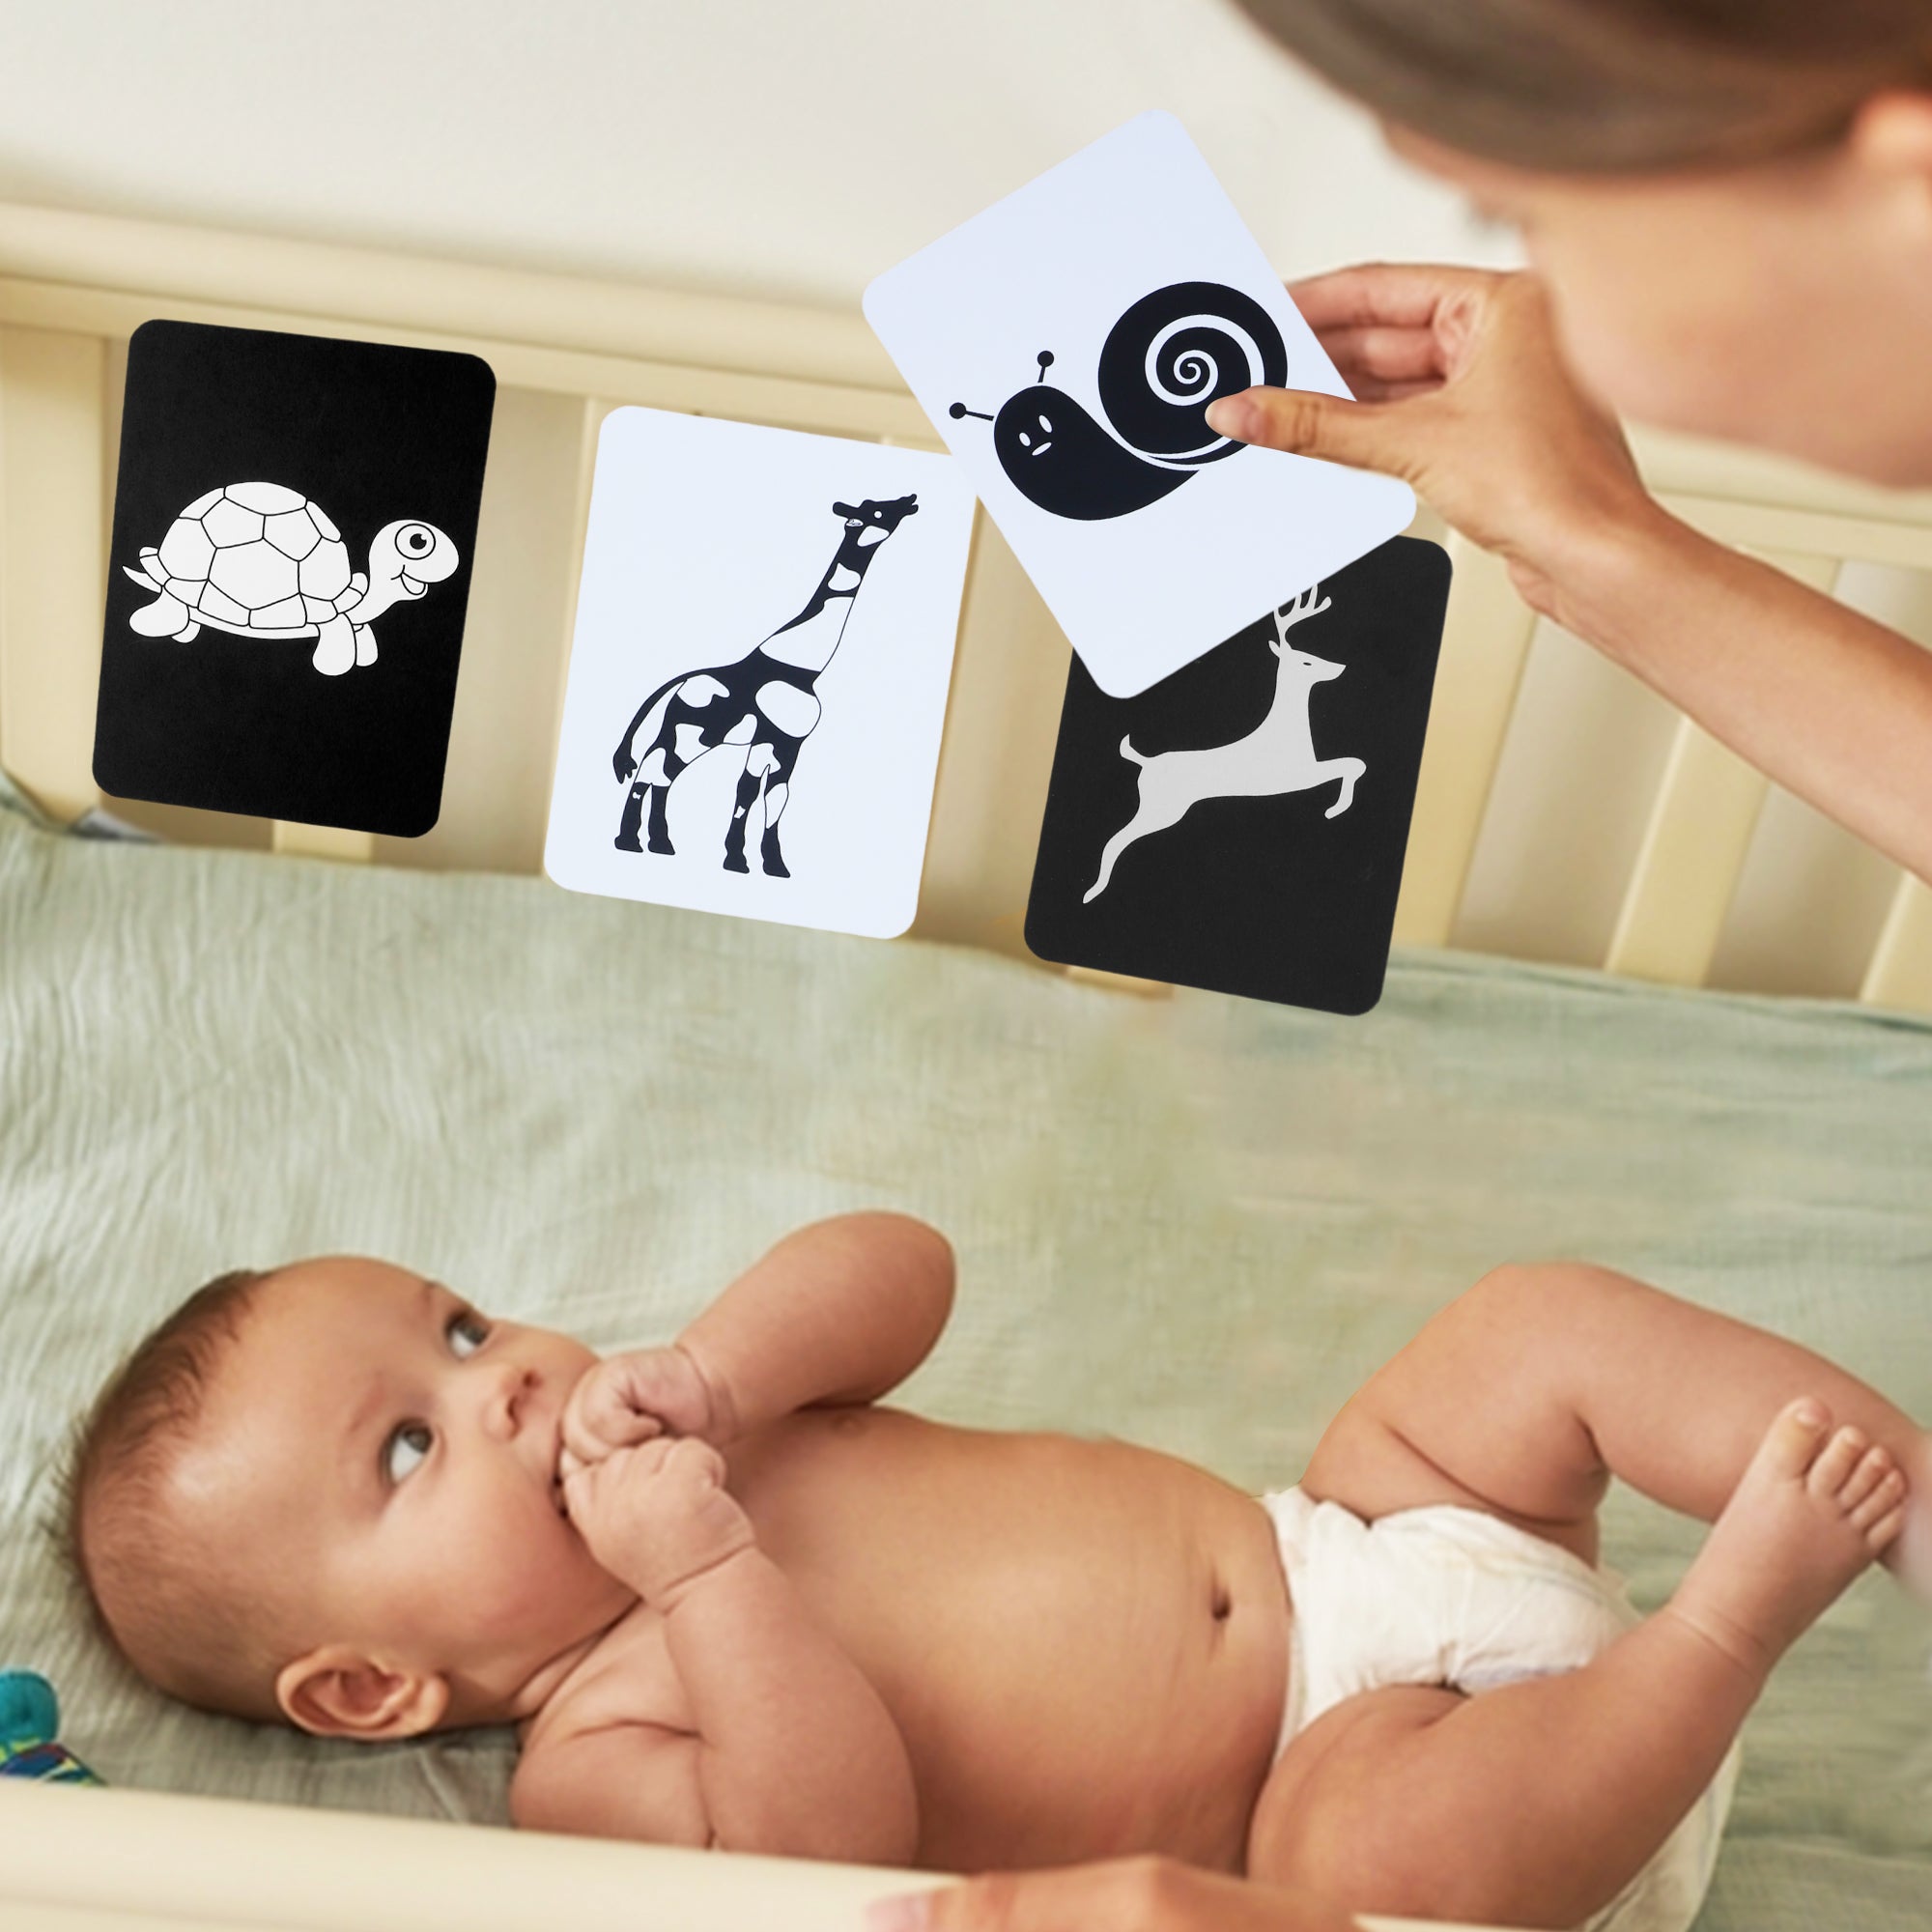 Baby Moo High Contrast Flash Cards 36 Cards - Bundle of Animals And Objects And Vehicles And Patterns